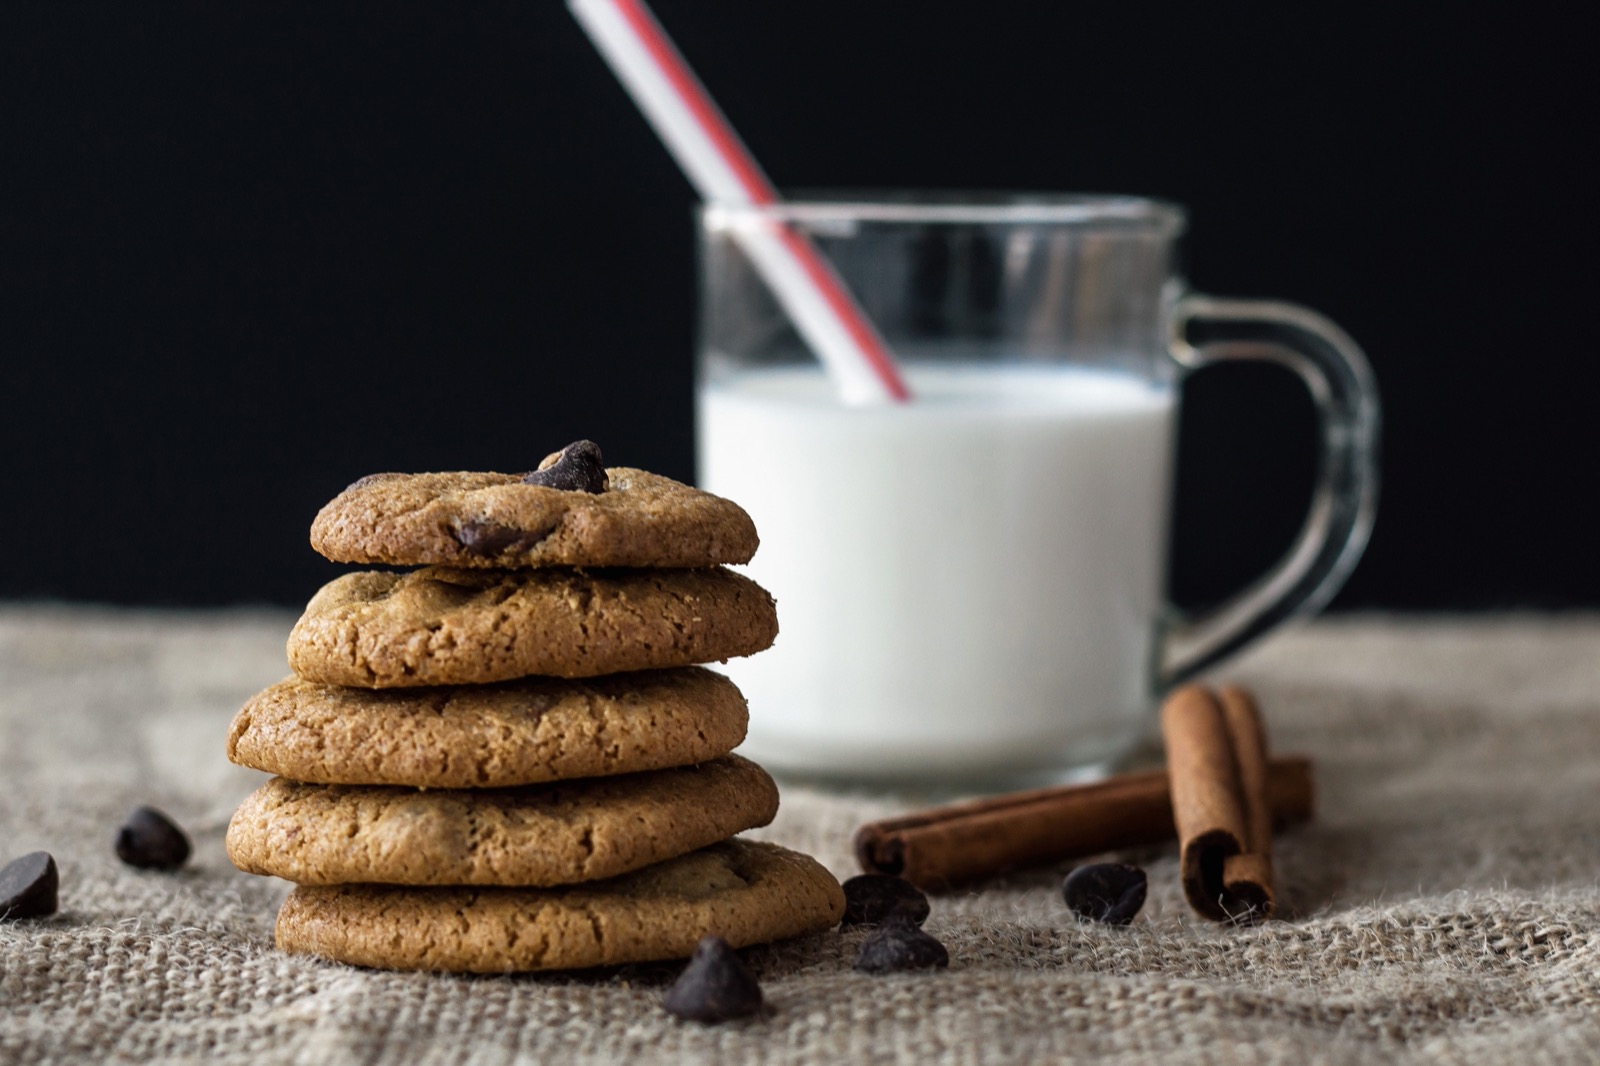 Would You Rather Eat Boomer Foods or Millennial Foods? Milk and cookies